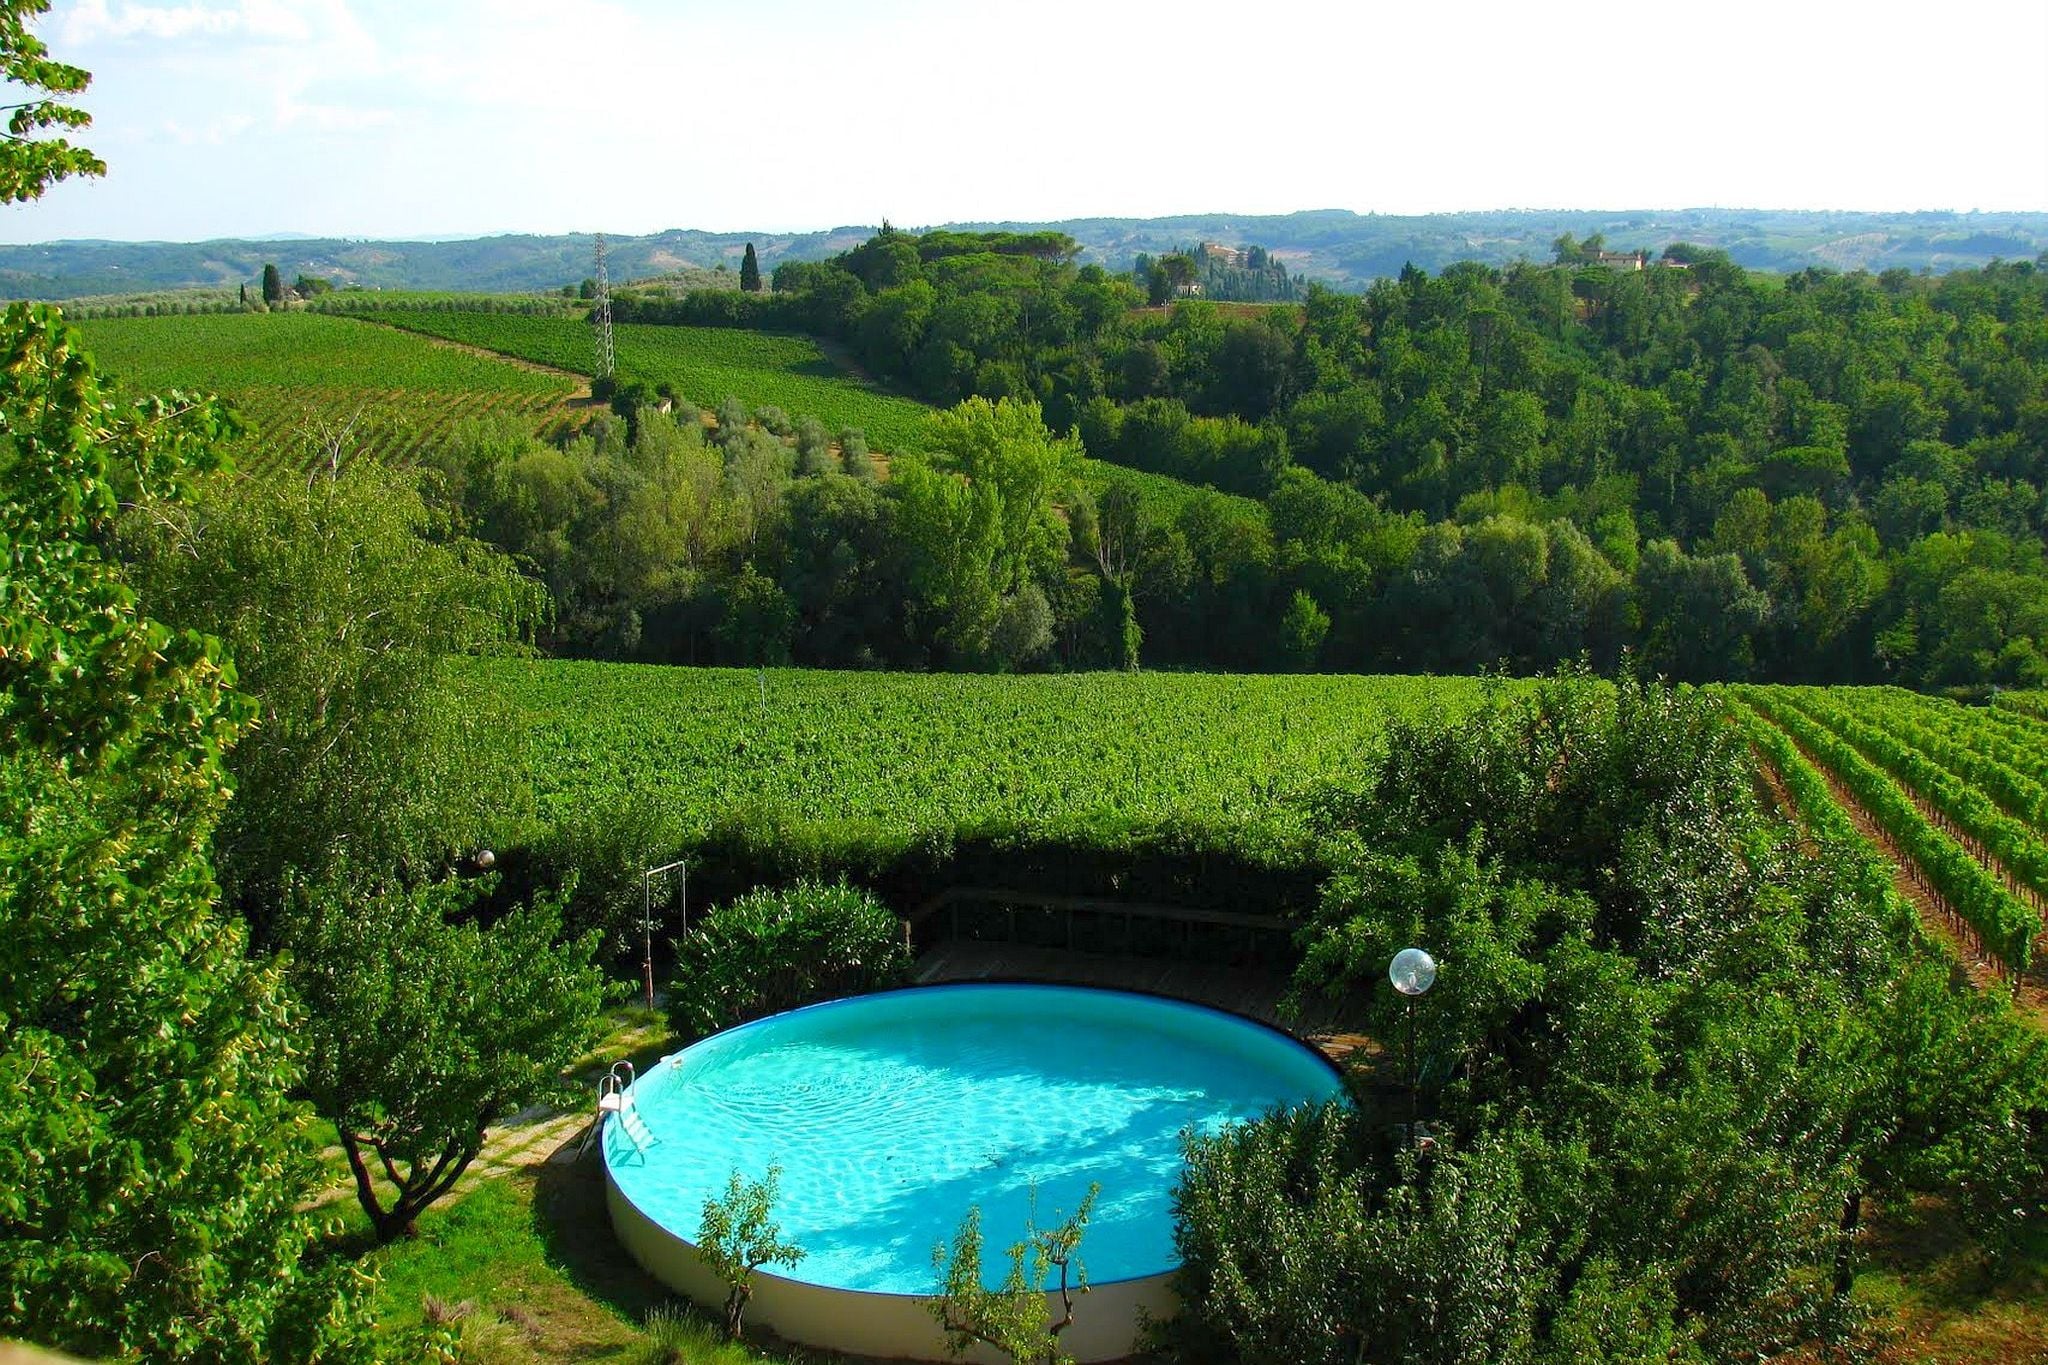 Part of a beautiful manor house overlooking the hills of Chianti Classico